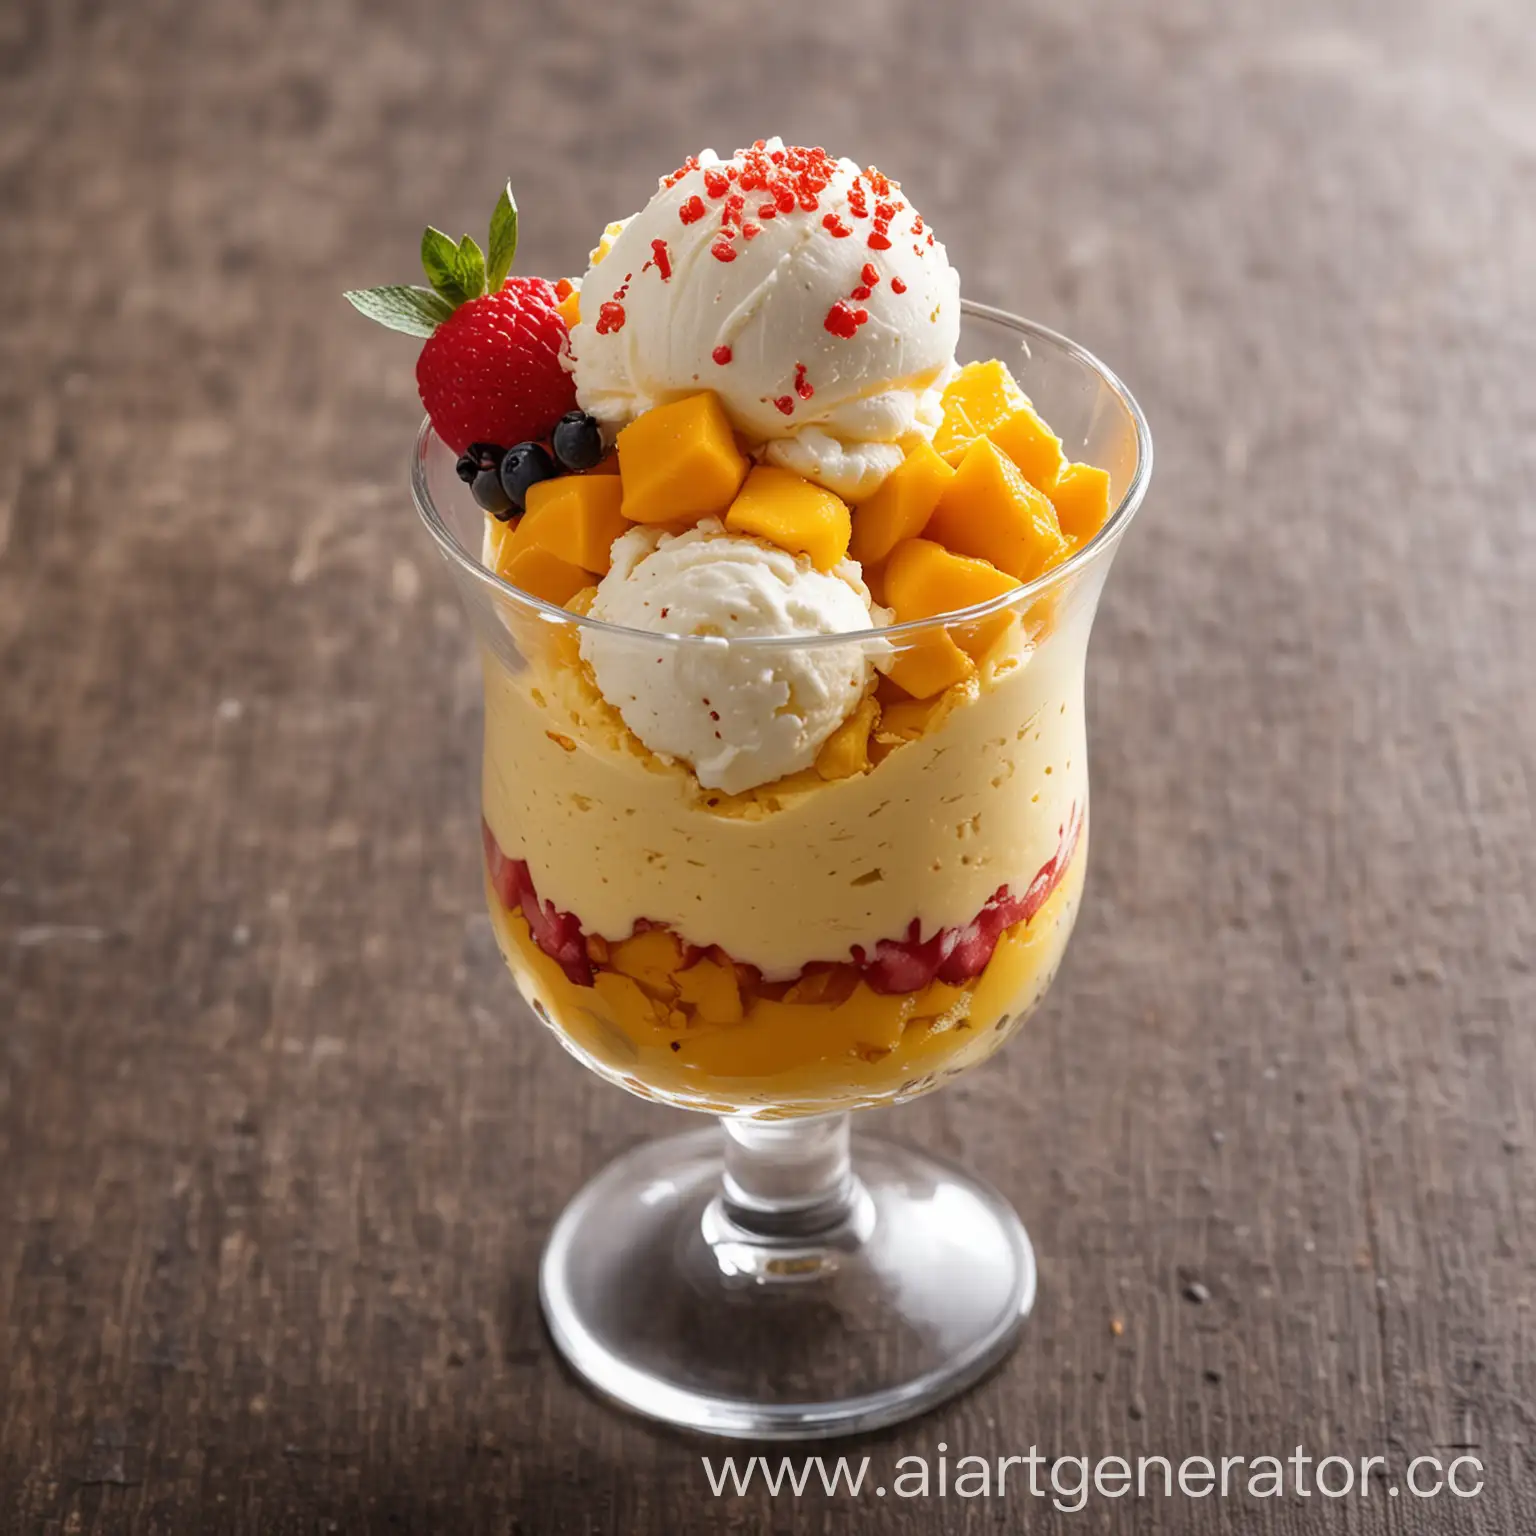 Refreshing-Mango-Ice-Cream-with-Whipped-Cream-and-Fresh-Fruits-in-Transparent-Cup